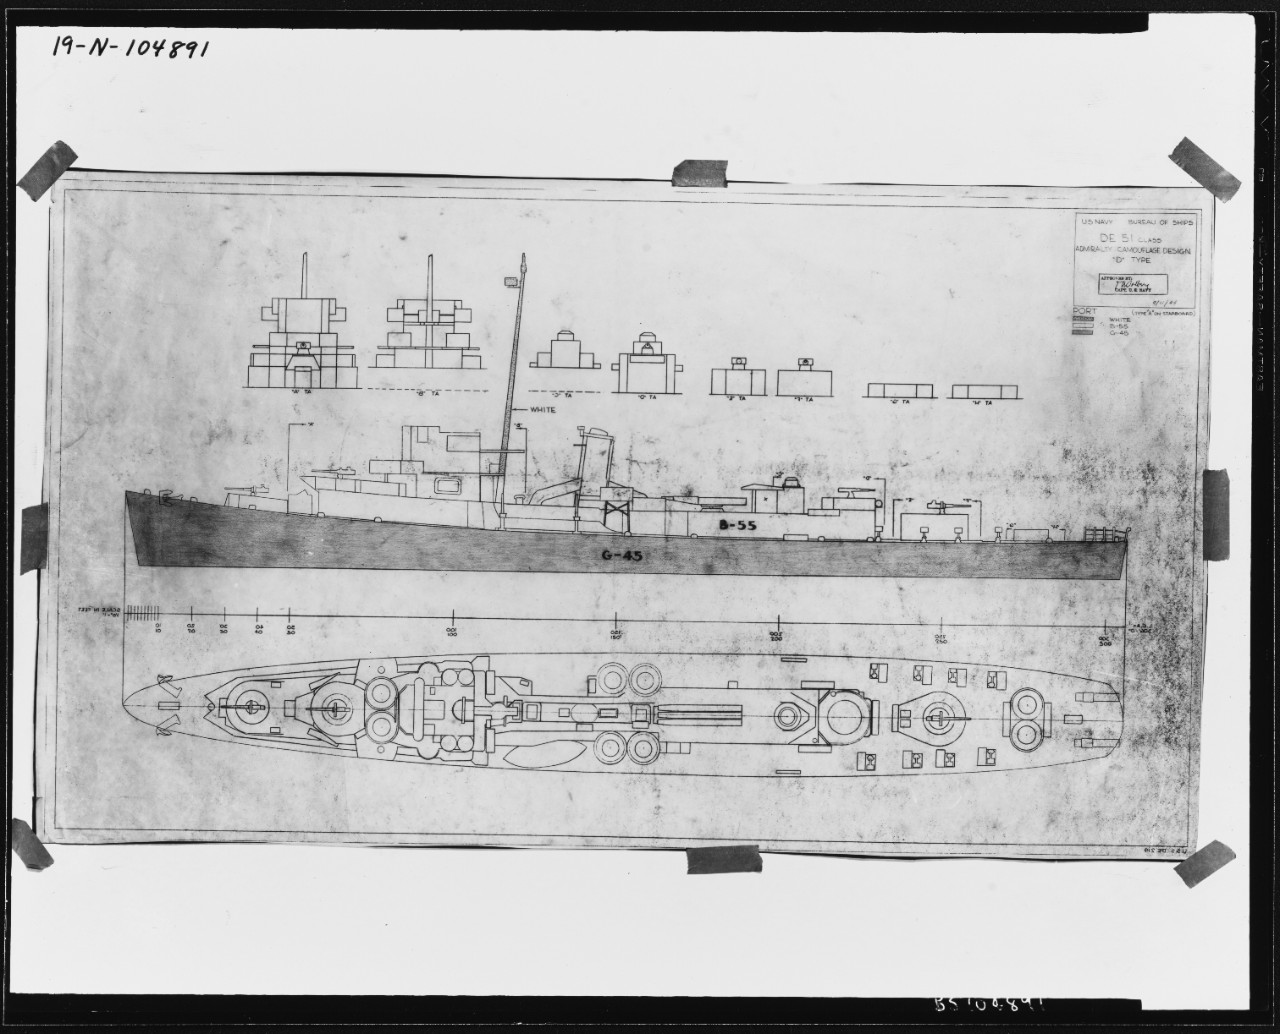 Photo #: 19-N-104891  Admiralty Camouflage Design, "D" Type